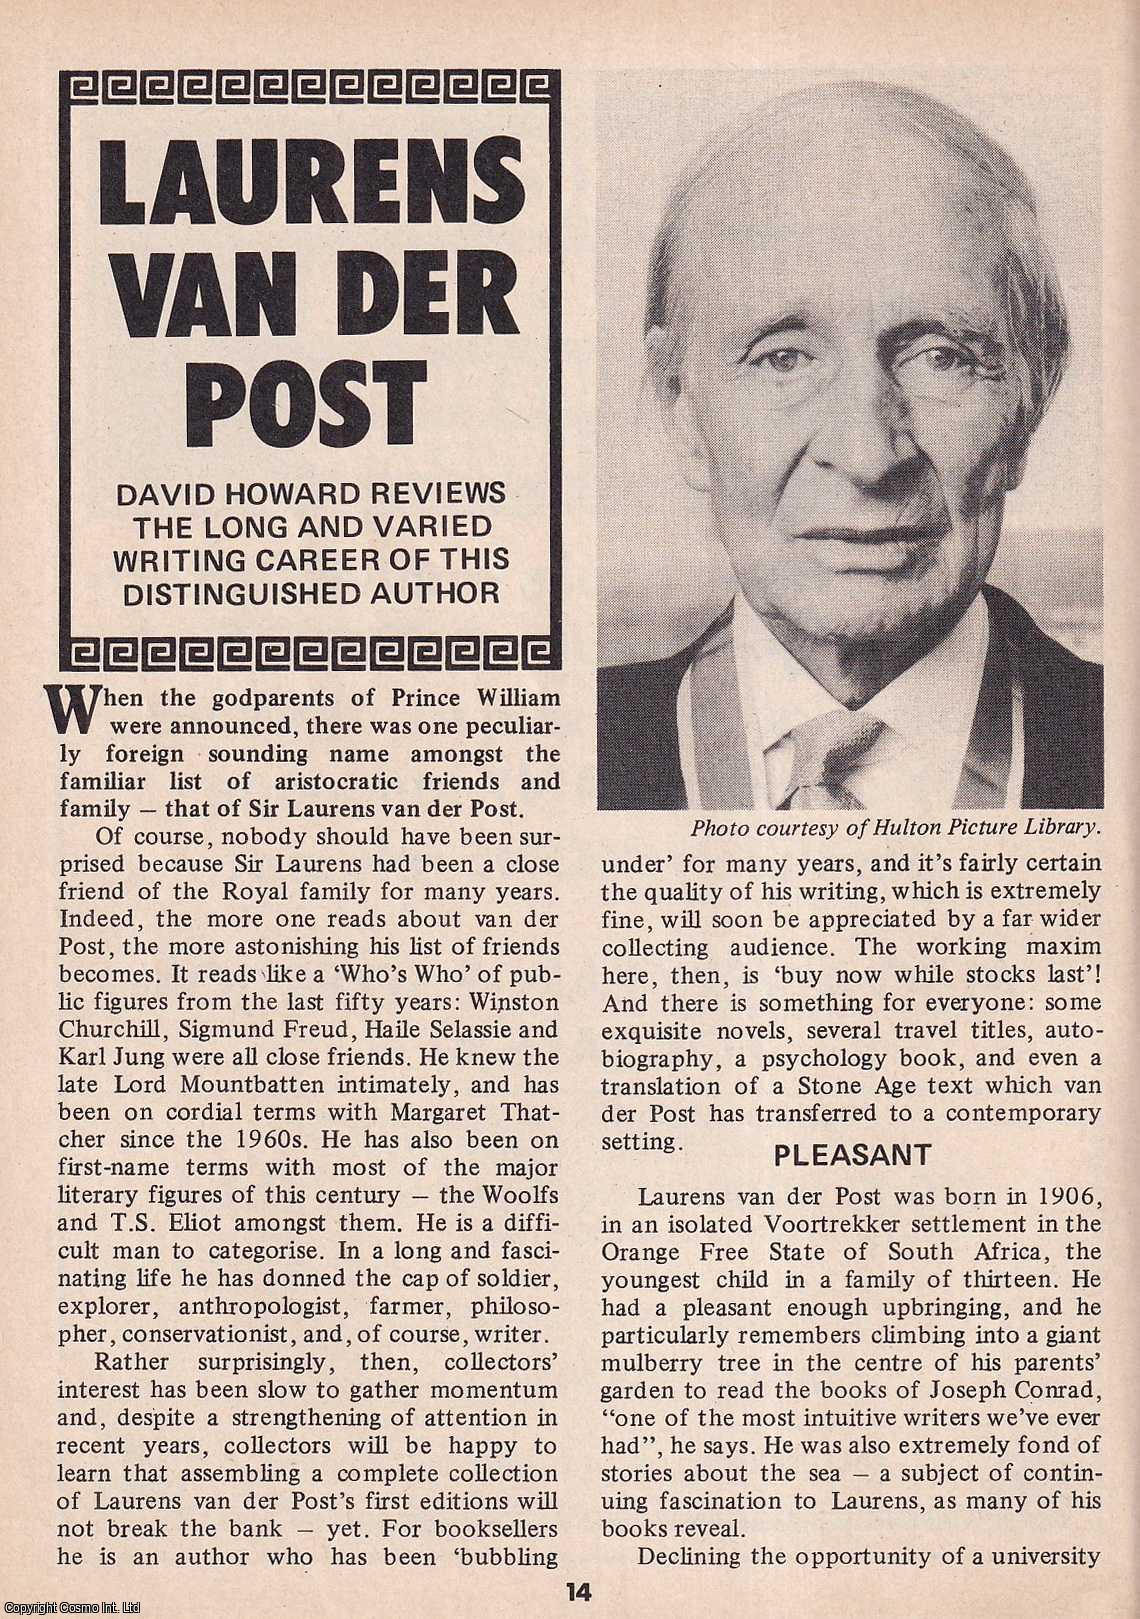 David Howard - Laurens Van Der Post (South African author). This is an original article separated from an issue of The Book & Magazine Collector publication.